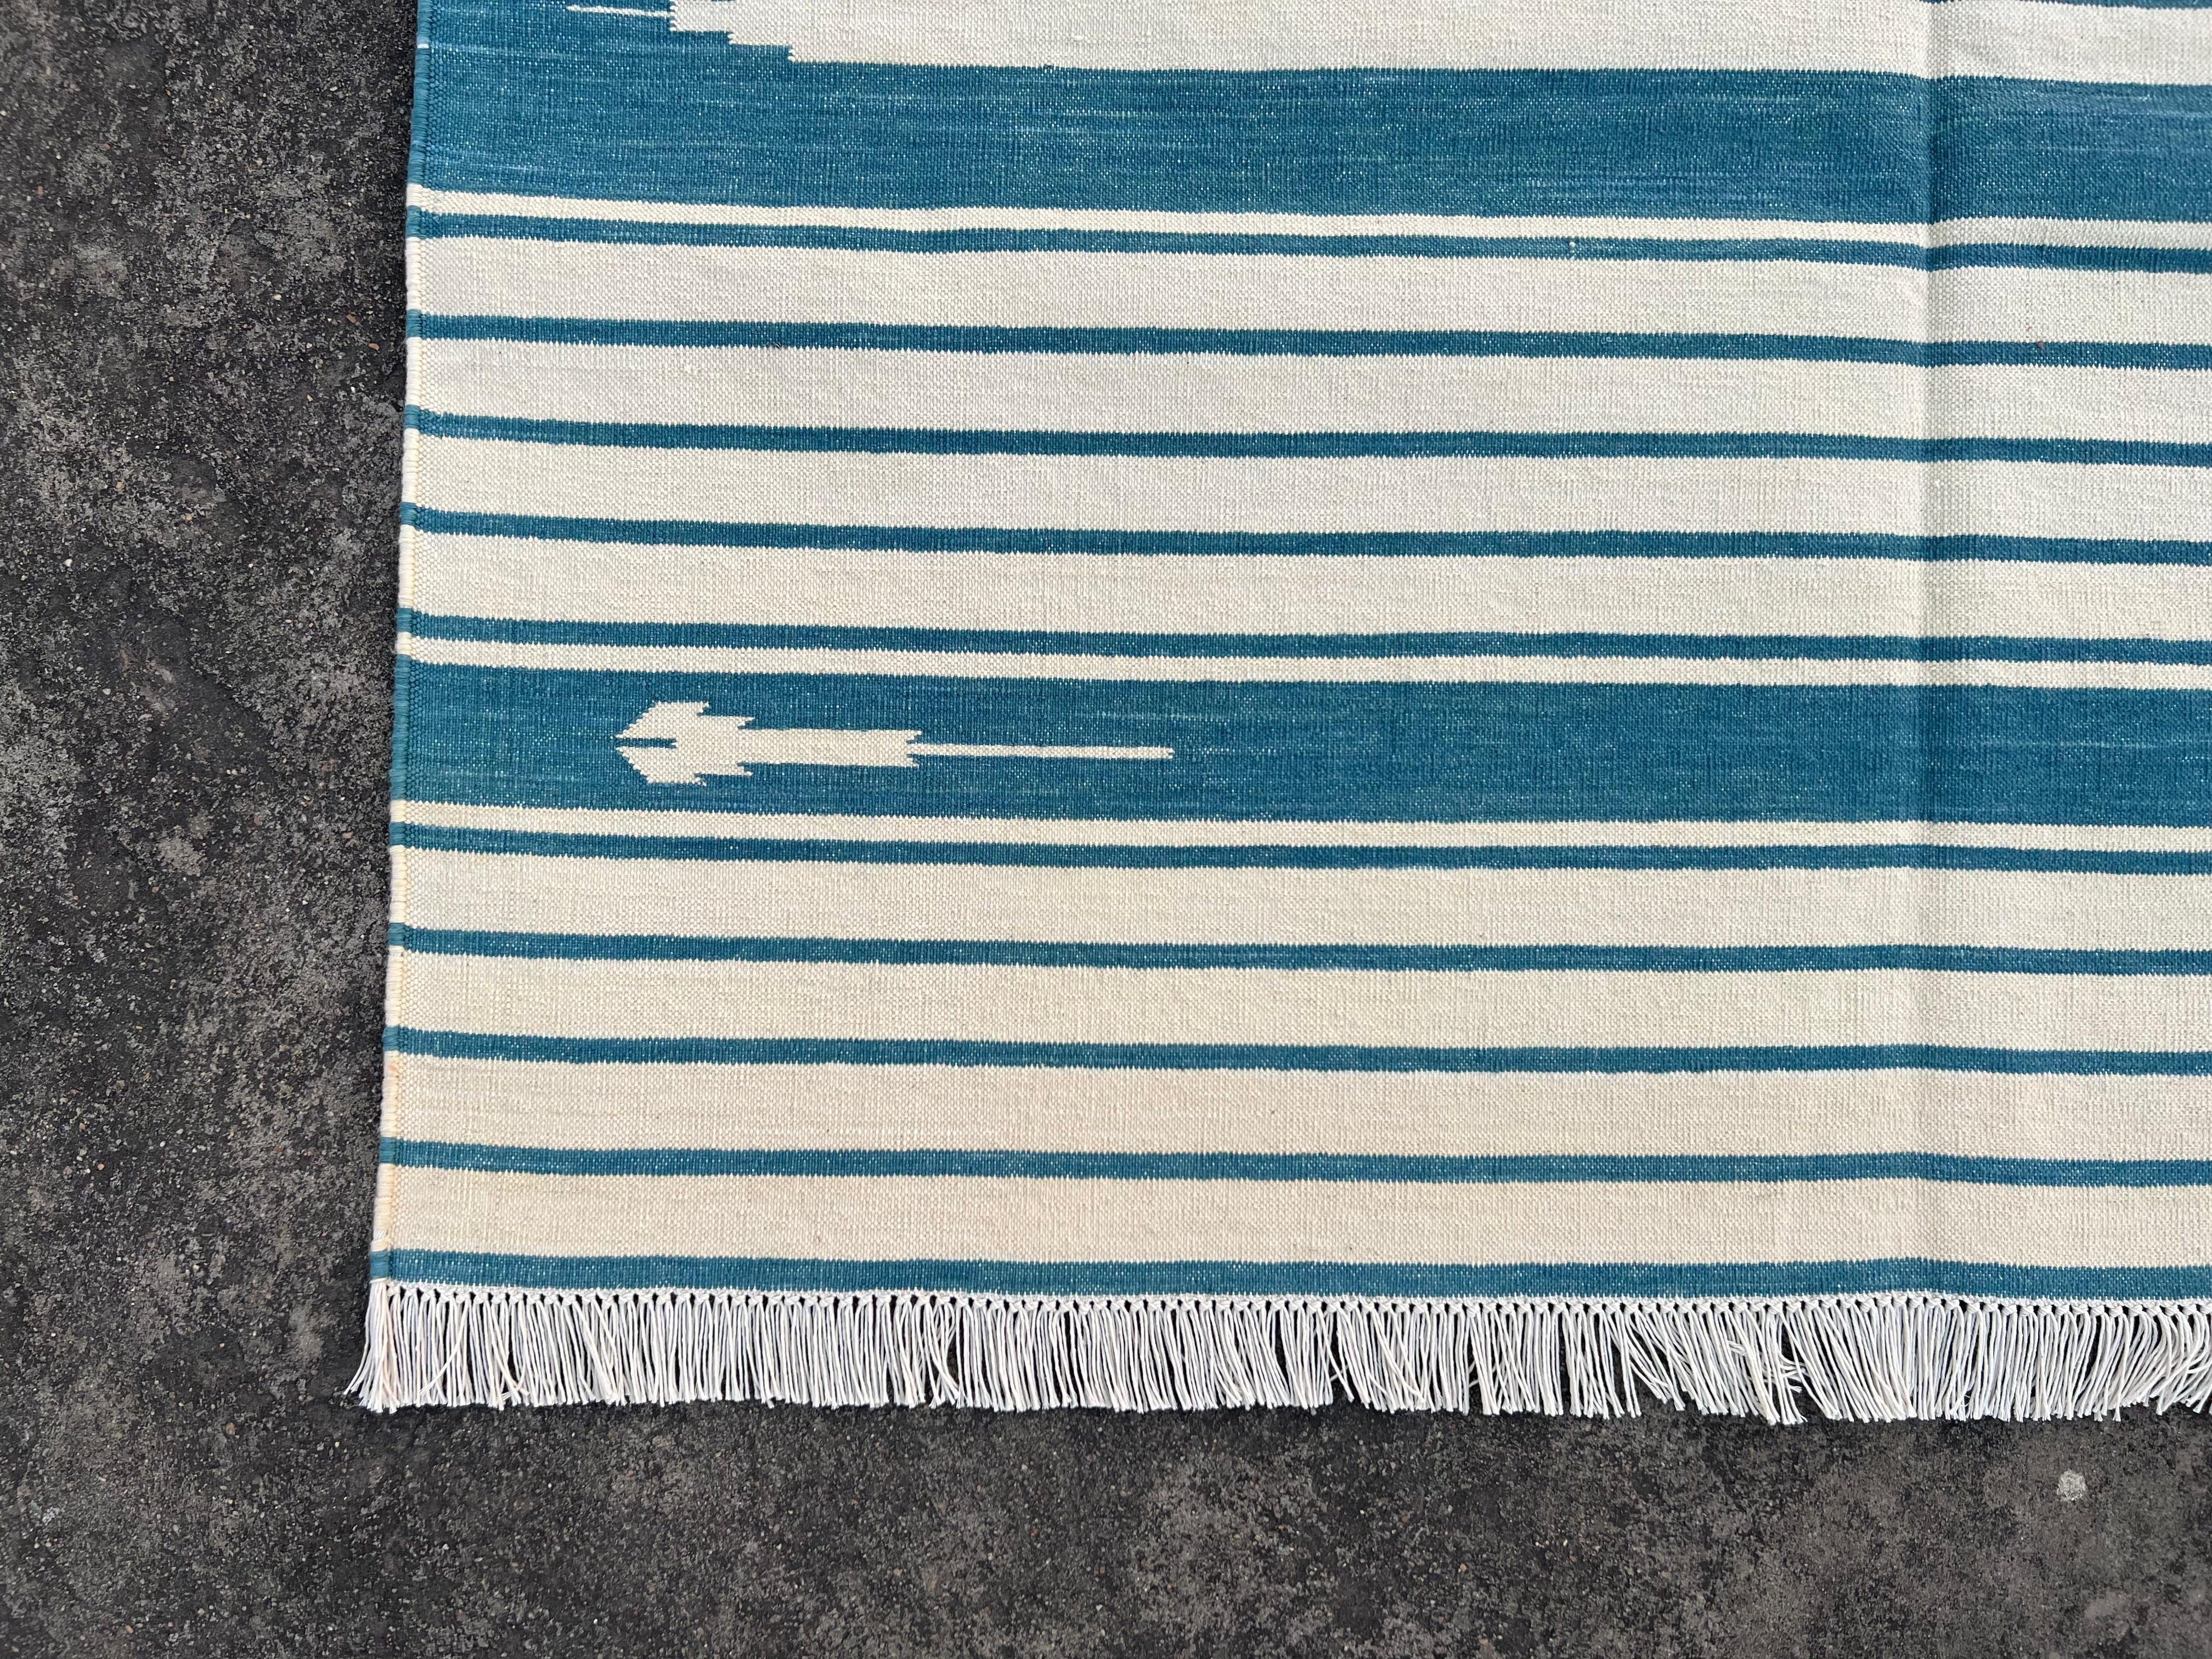 Contemporary Handmade Cotton Area Flat Weave Rug, 4x6 Cream And Blue Striped Indian Dhurrie For Sale